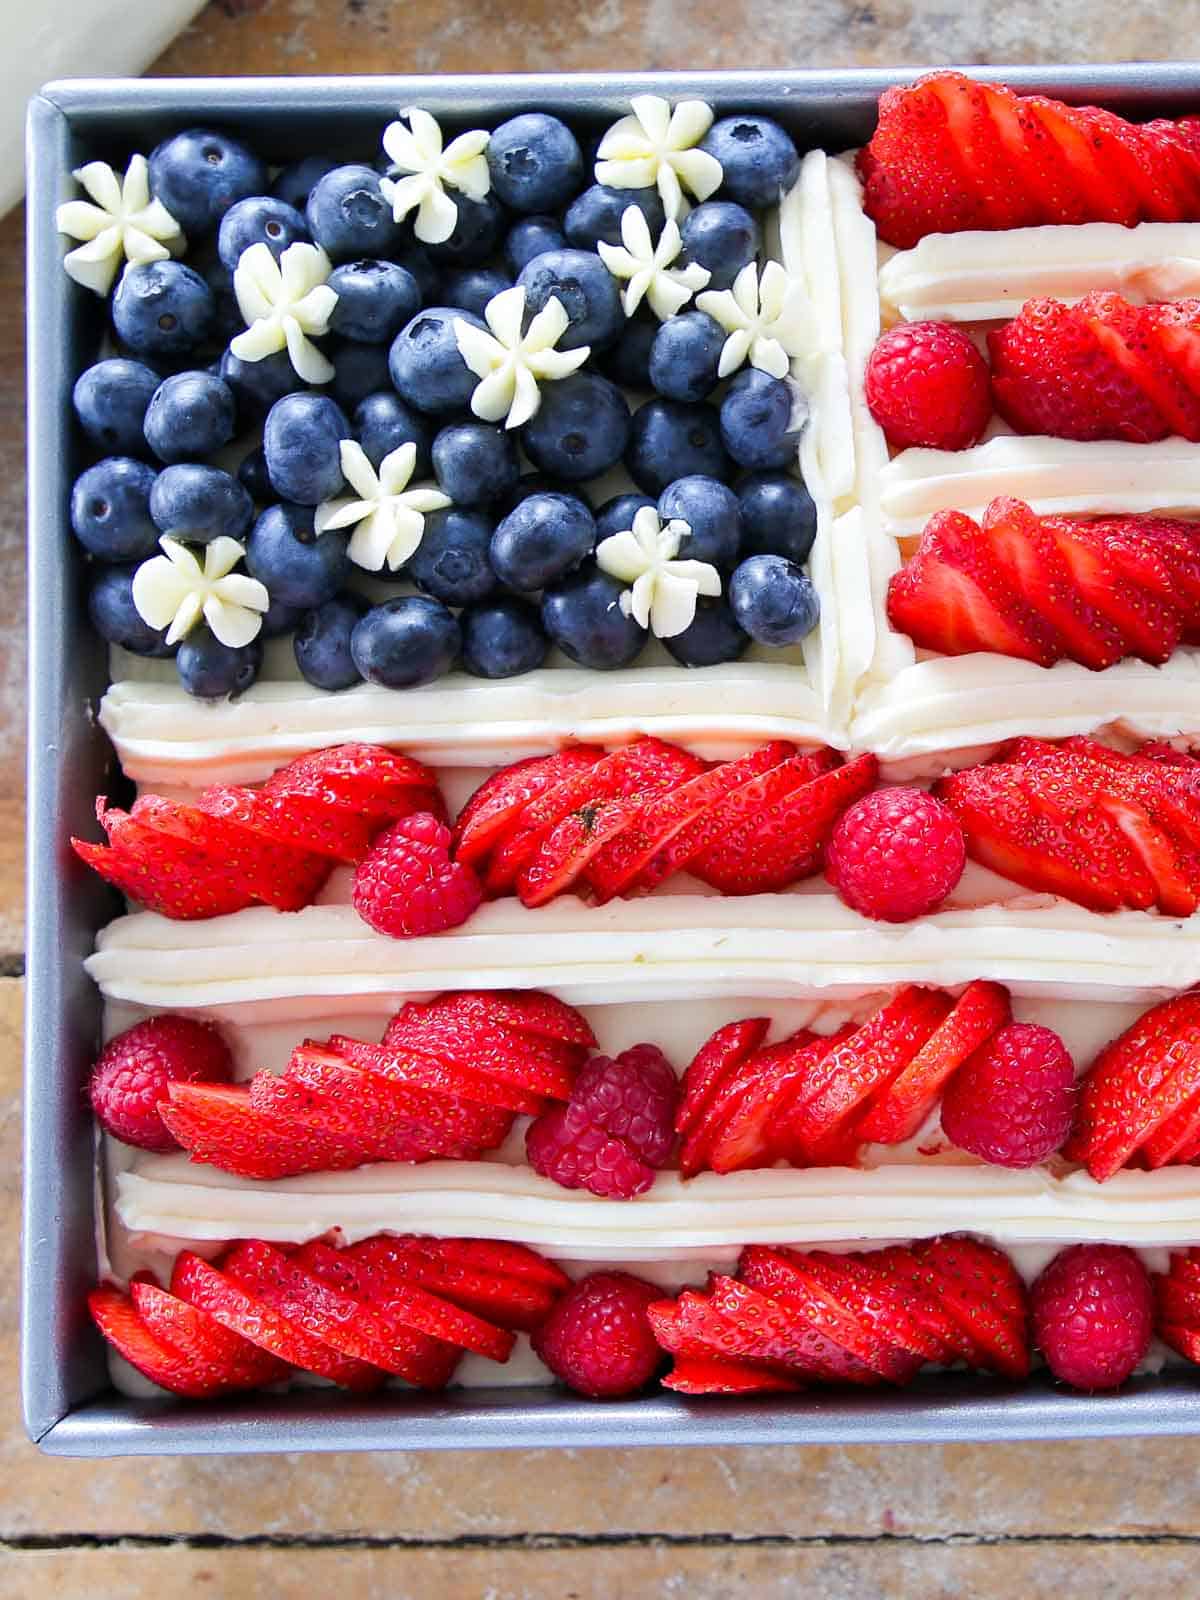 american flag cake with berries unsliced.